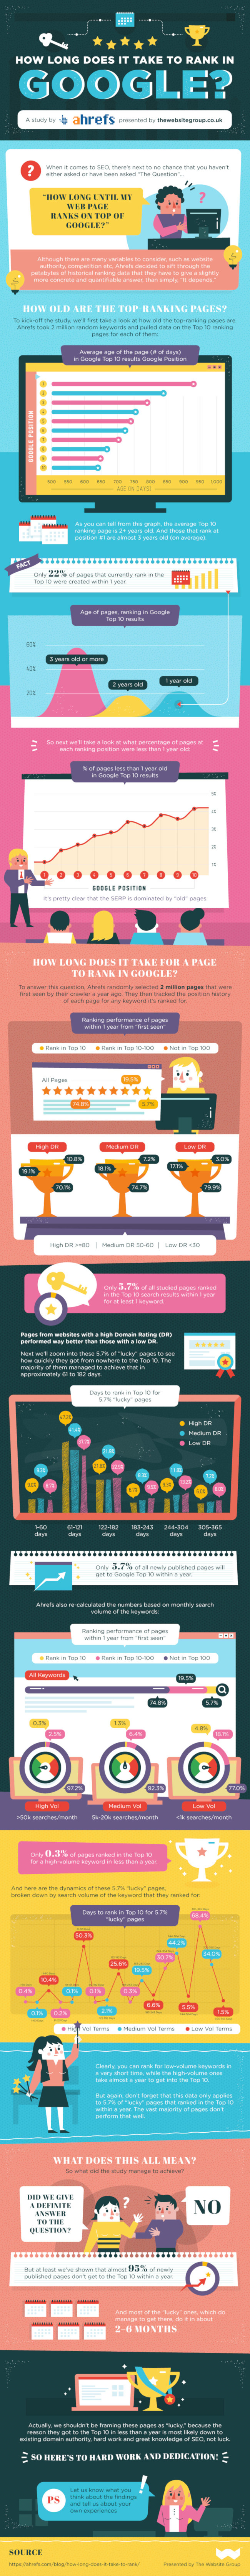 Why Does Ranking in Google Take so Long? [Infographic]